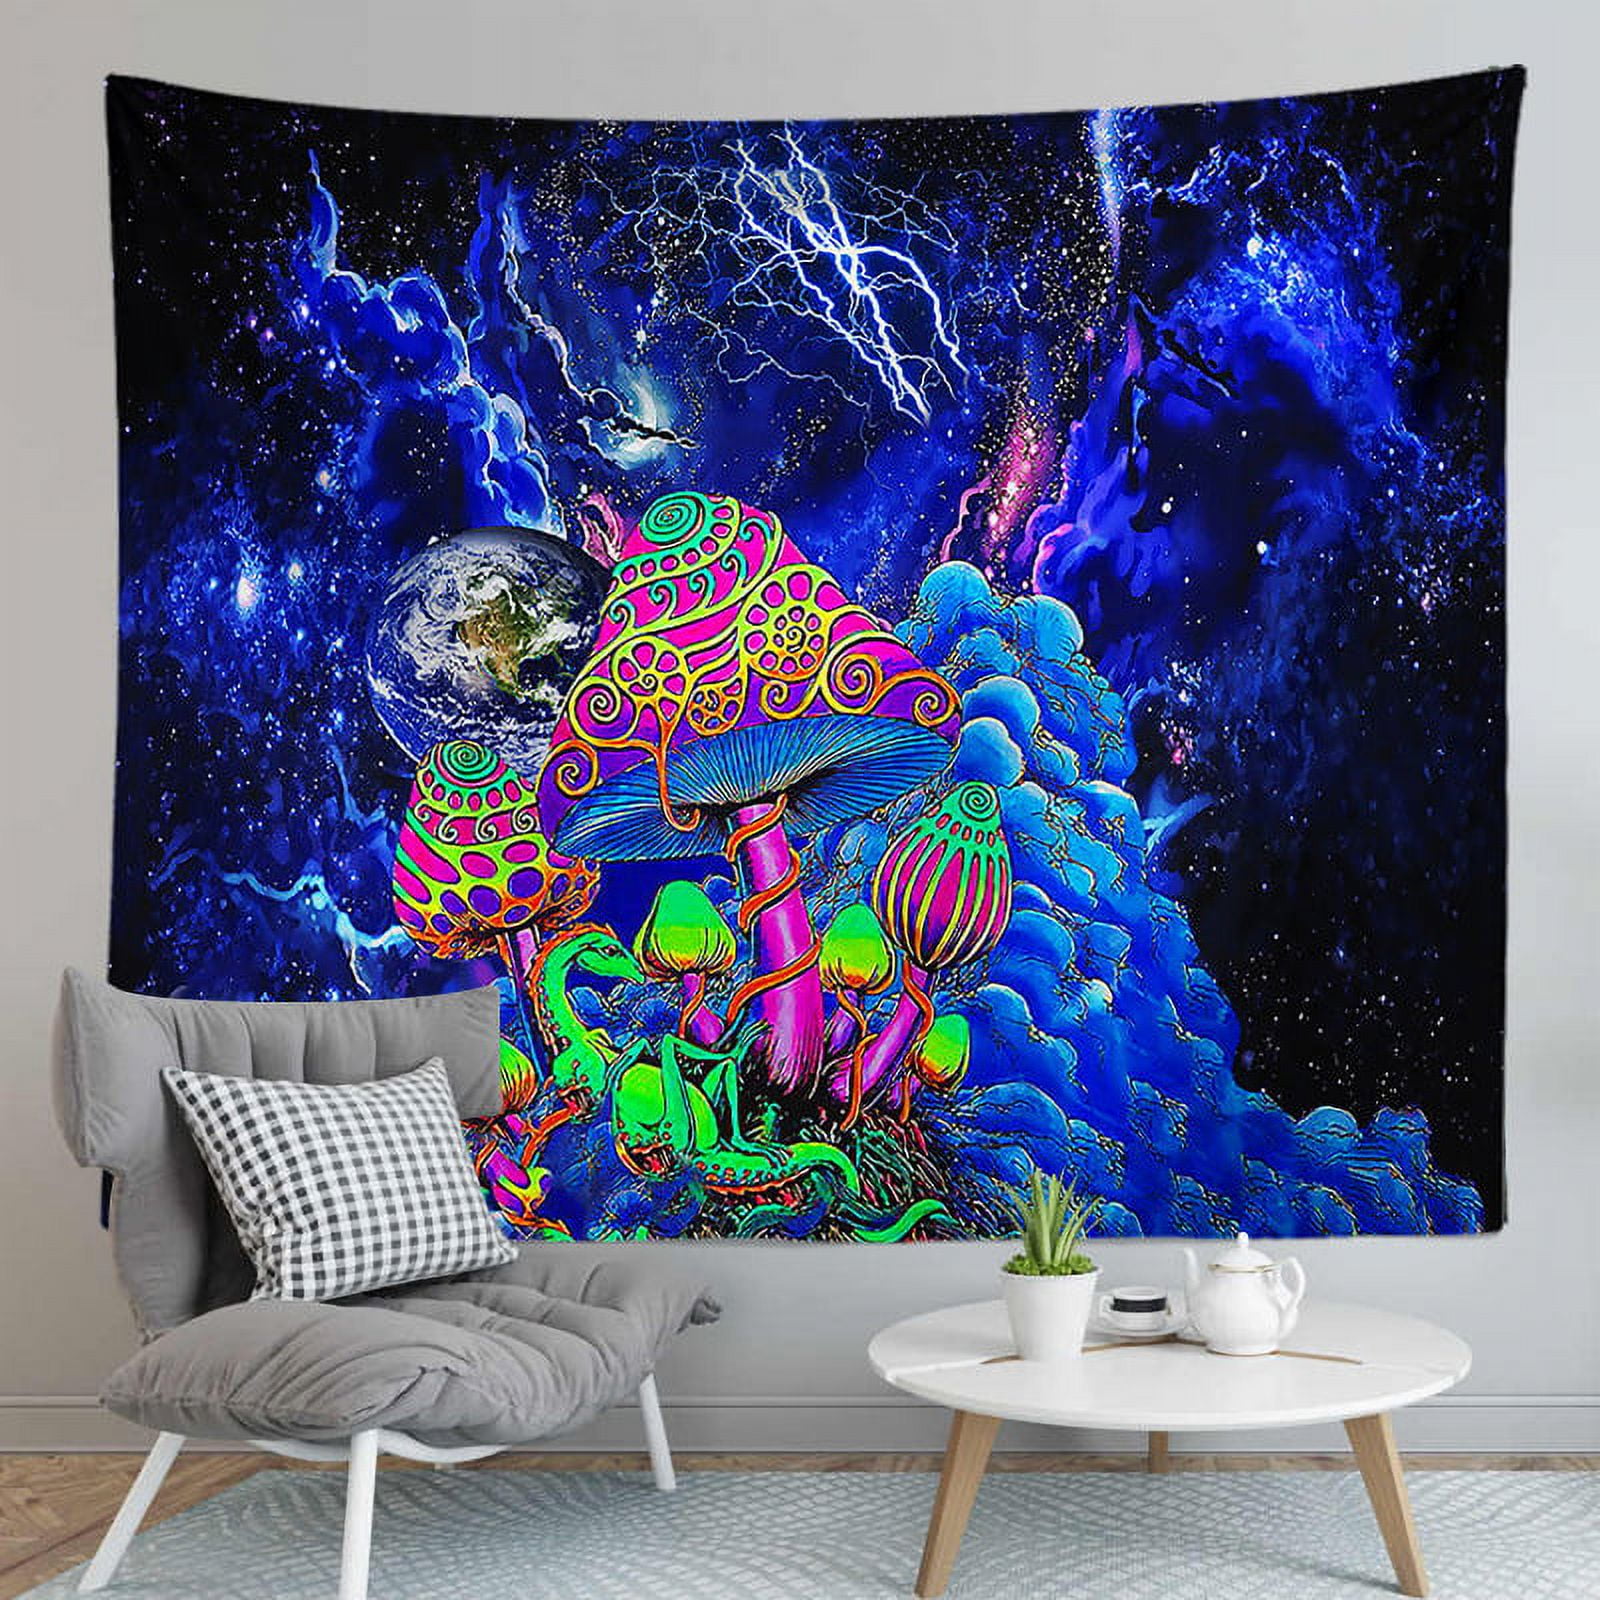 Shrahala Night Tapestry, Las Vegas Nevada Skyline Wall Hanging Large  Tapestry Psychedelic Tapestry Decorations Bedroom Living Room Dorm(51.2 x  59.1